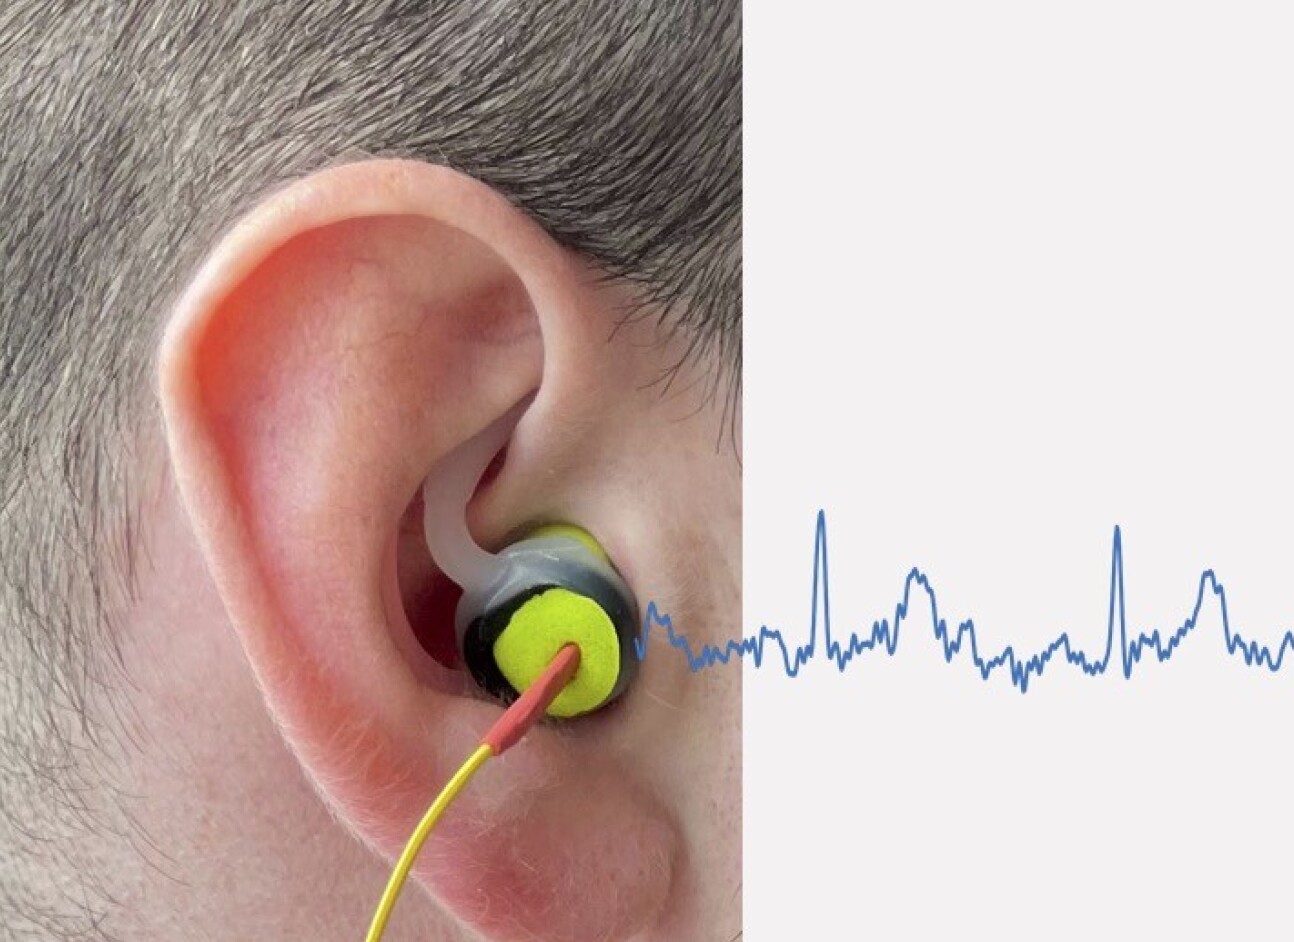 An ear with ECG signals extending from it